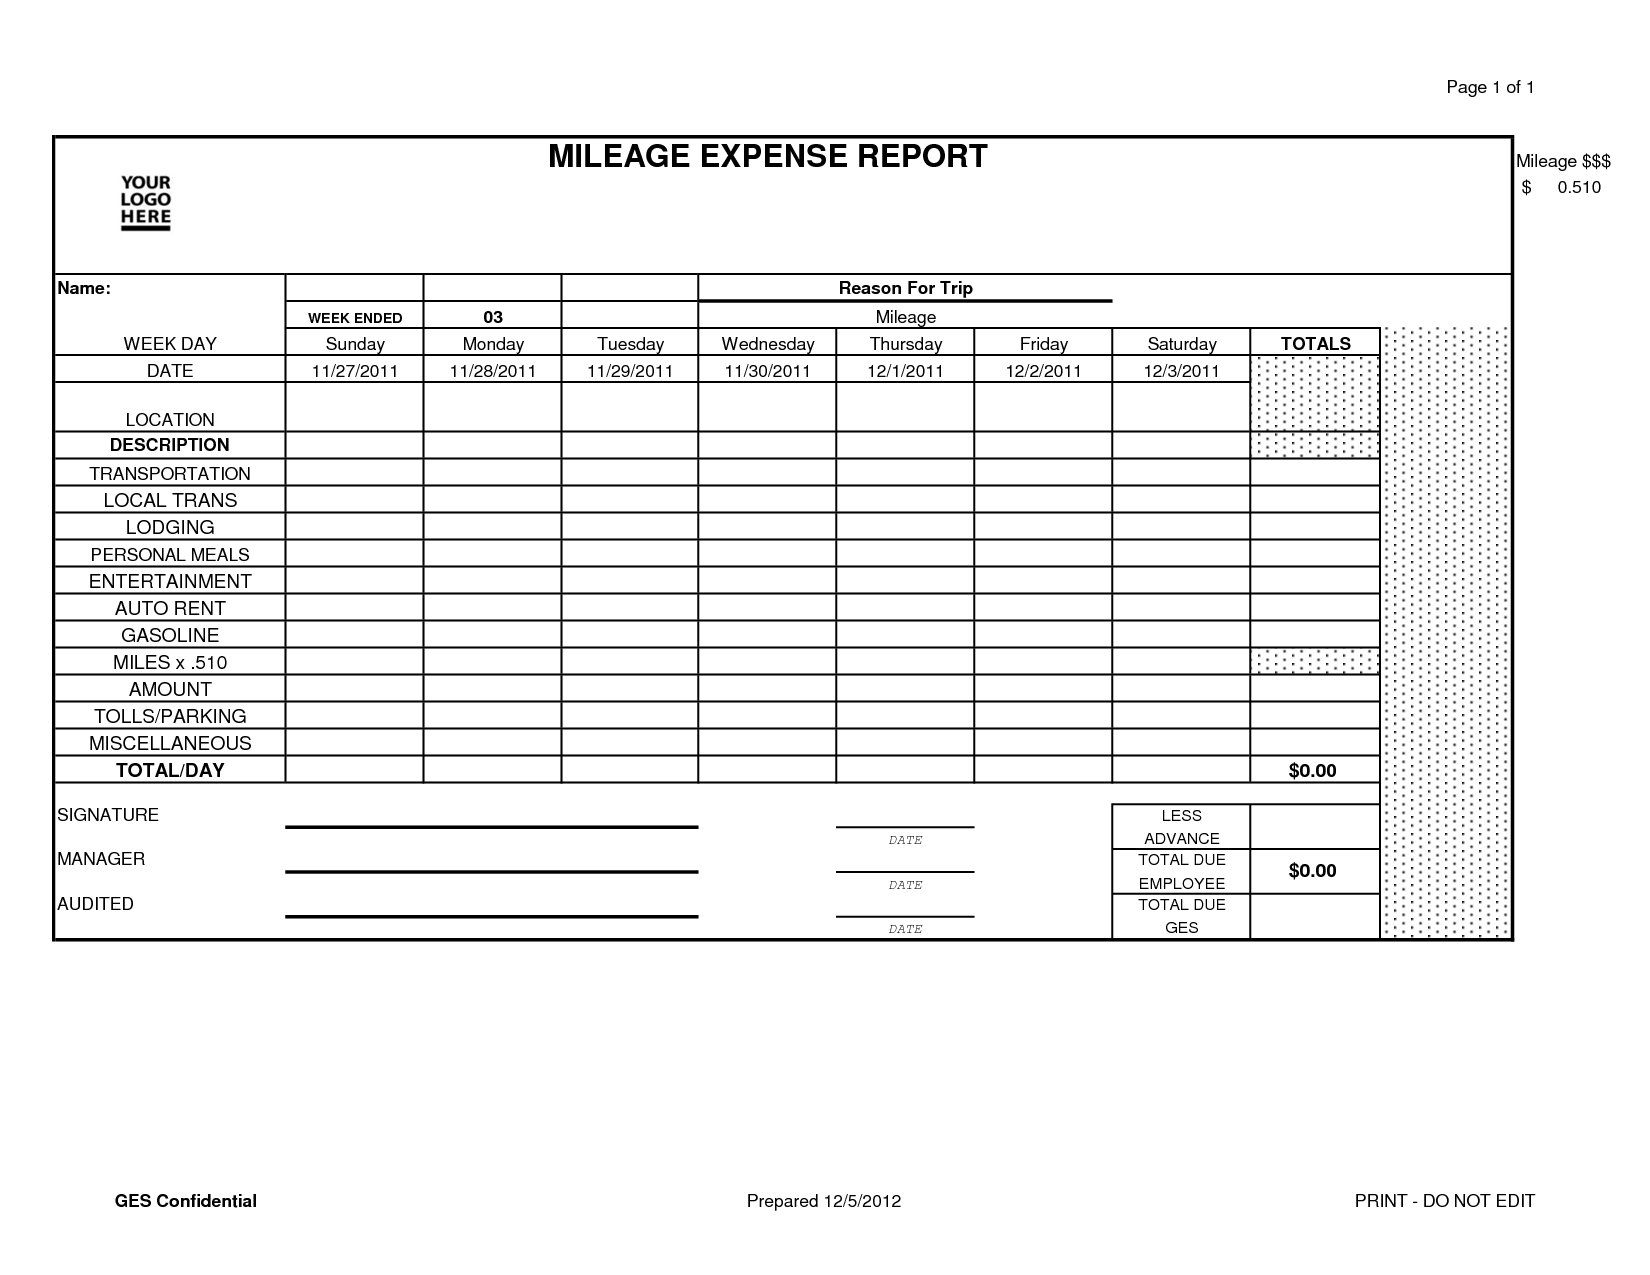 Annual Expense And Gas Mileage Summary And Report Form For Employee in Gas Mileage Expense Report Template